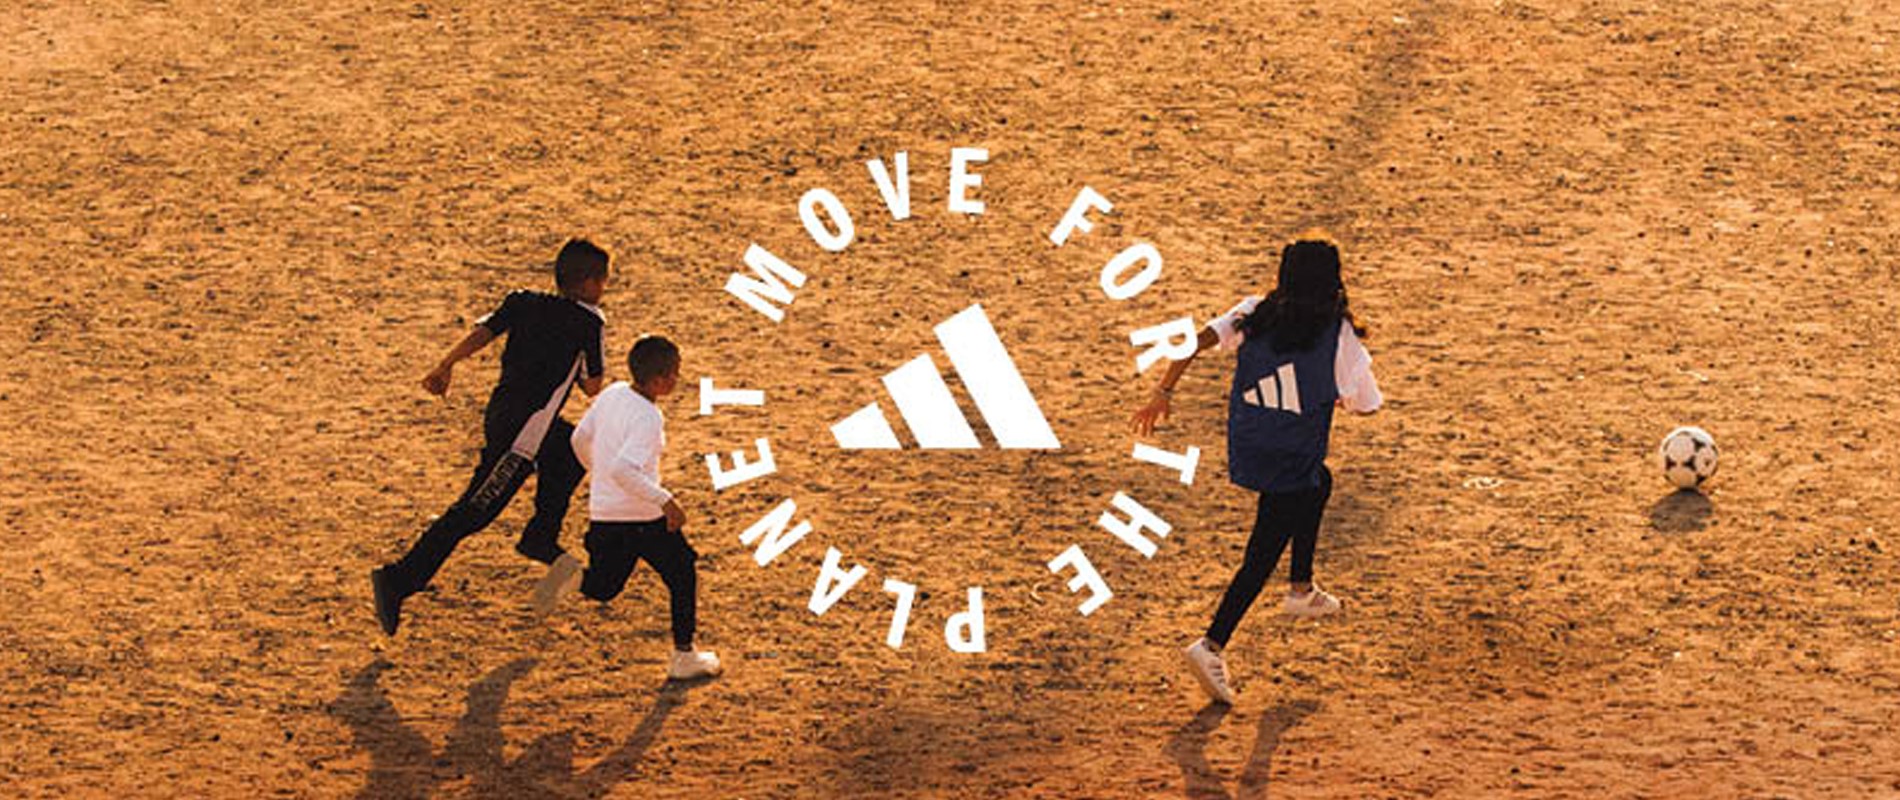 adidas Announces Second Year of Move for the Planet Funding Projects in Areas Impacted by Extreme Weather Conditions Around the World